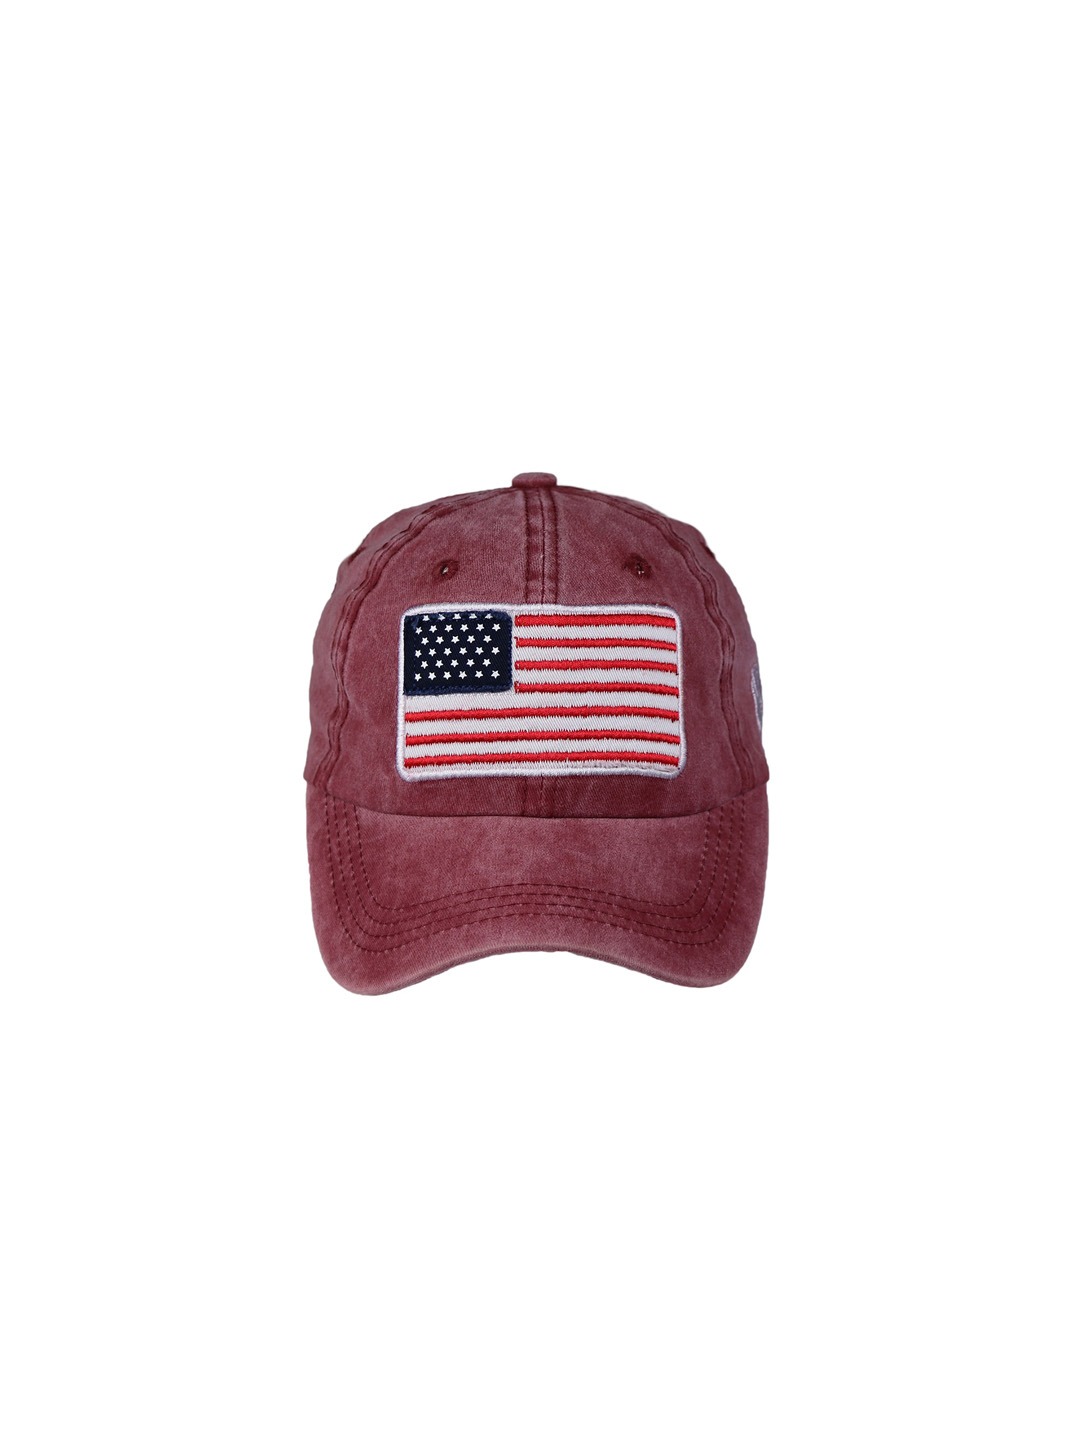 Accessories Caps | iSWEVEN Unisex Red Printed Snapback Cap - XV57072